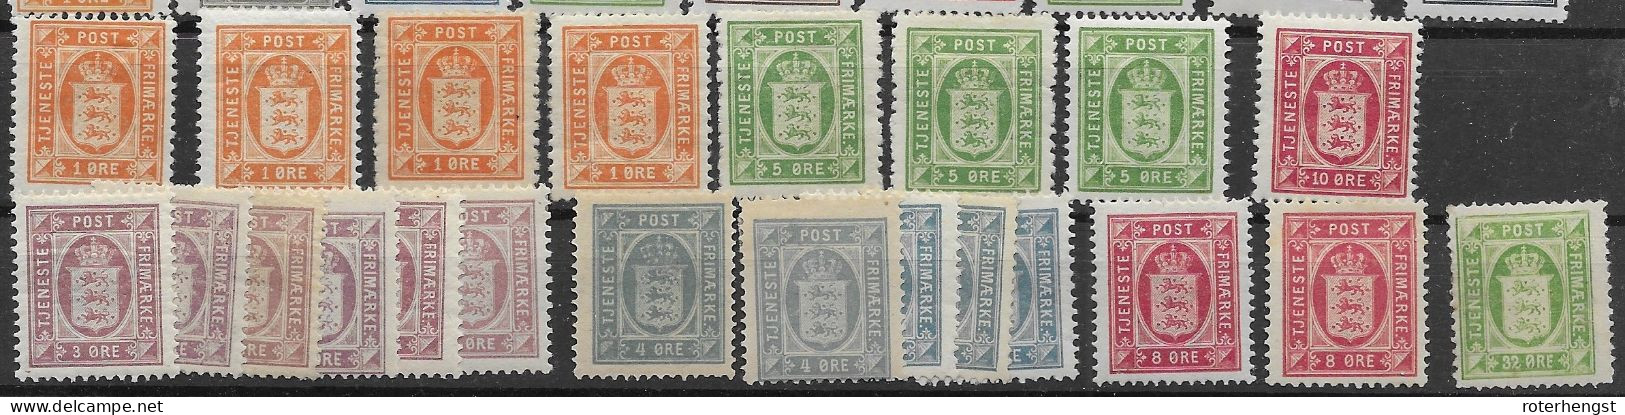 Denmark Officials Collection Mh* Some Are Mnh ** Different Perfs Wtm And Shades Over 200 Euros - Officials